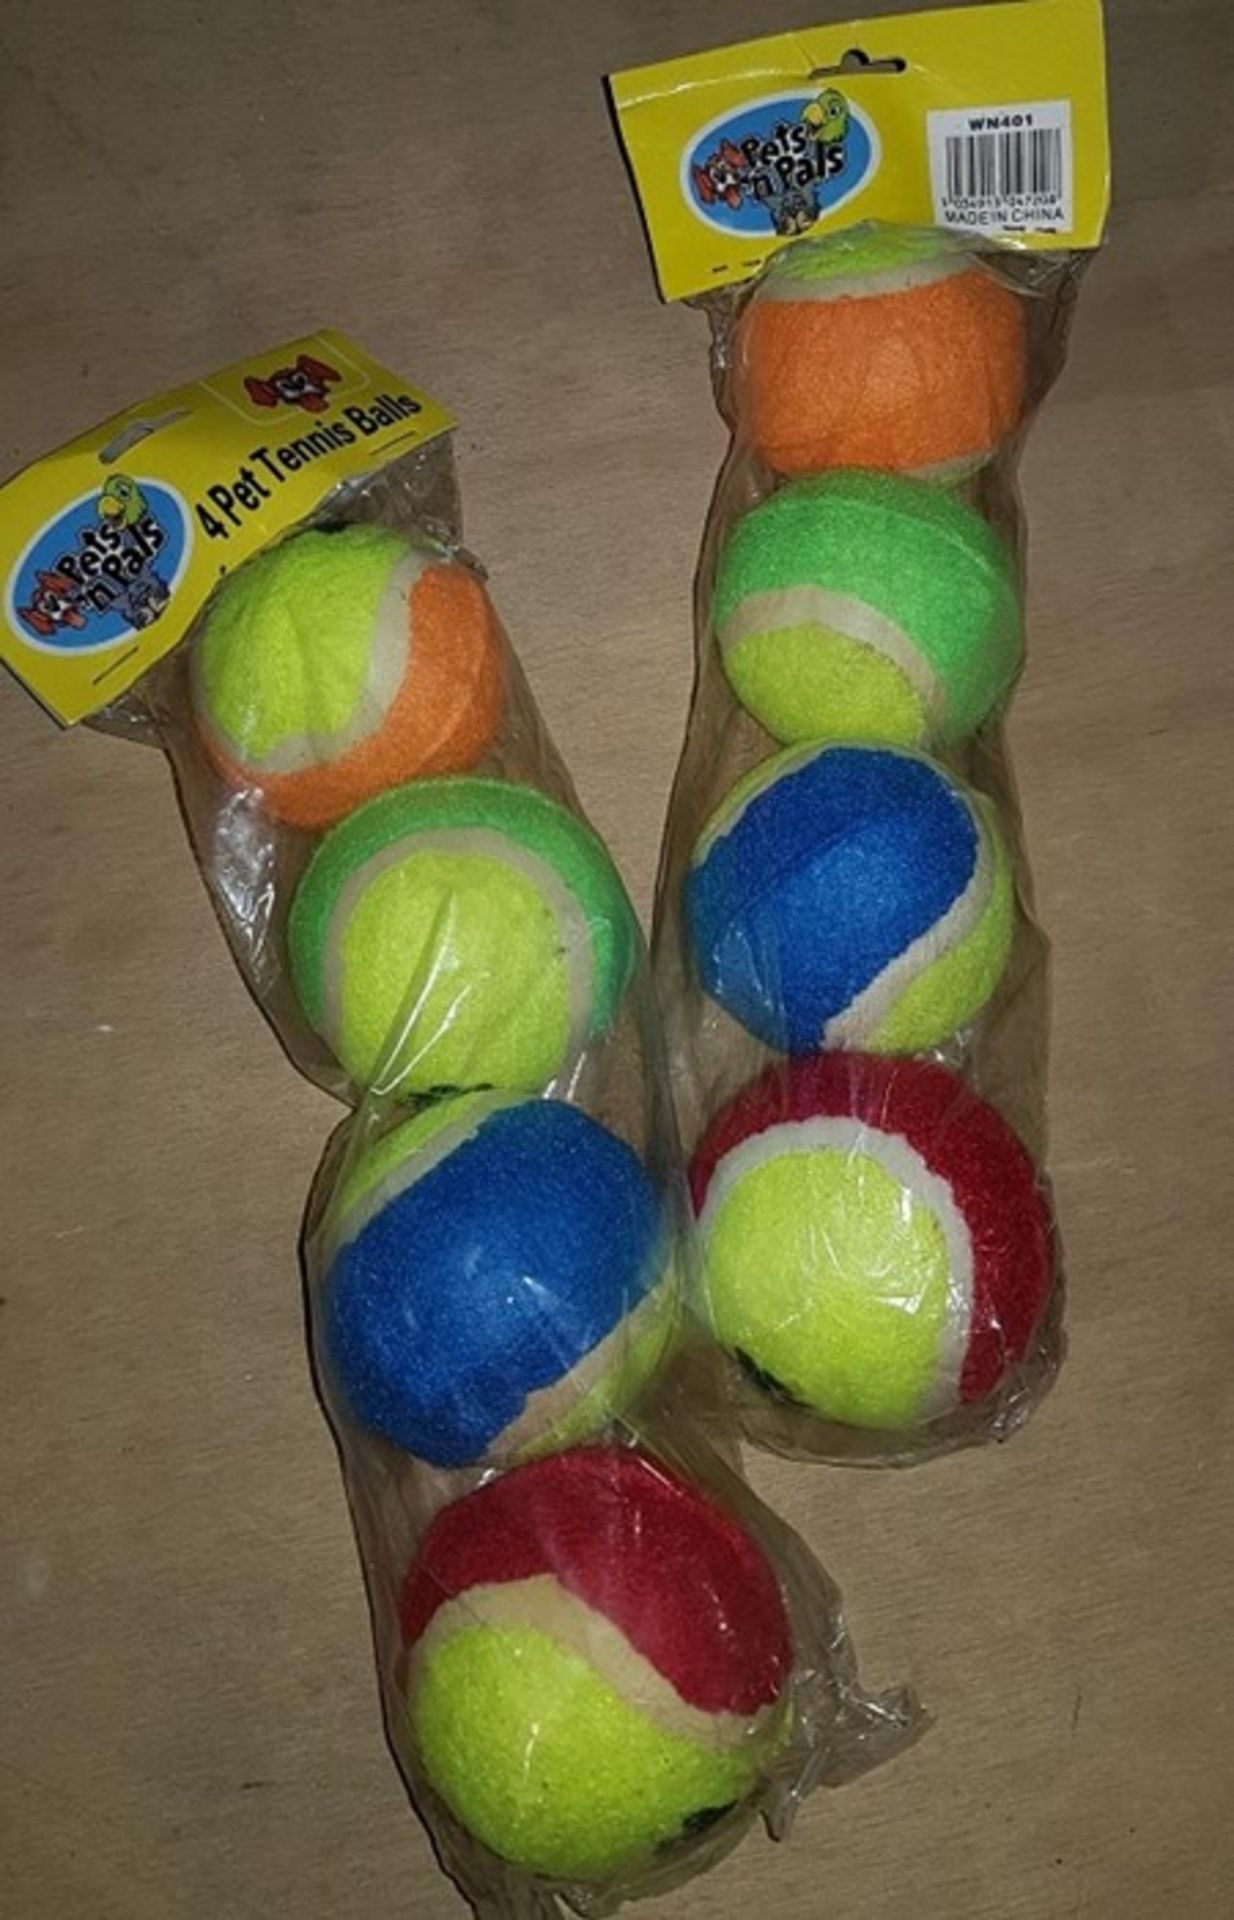 2 LOTS OF 4 PETS AND PALS TENNIS BALLS / QTY 8 BALLS (VIEWING HIGHLY RECOMMENDED)